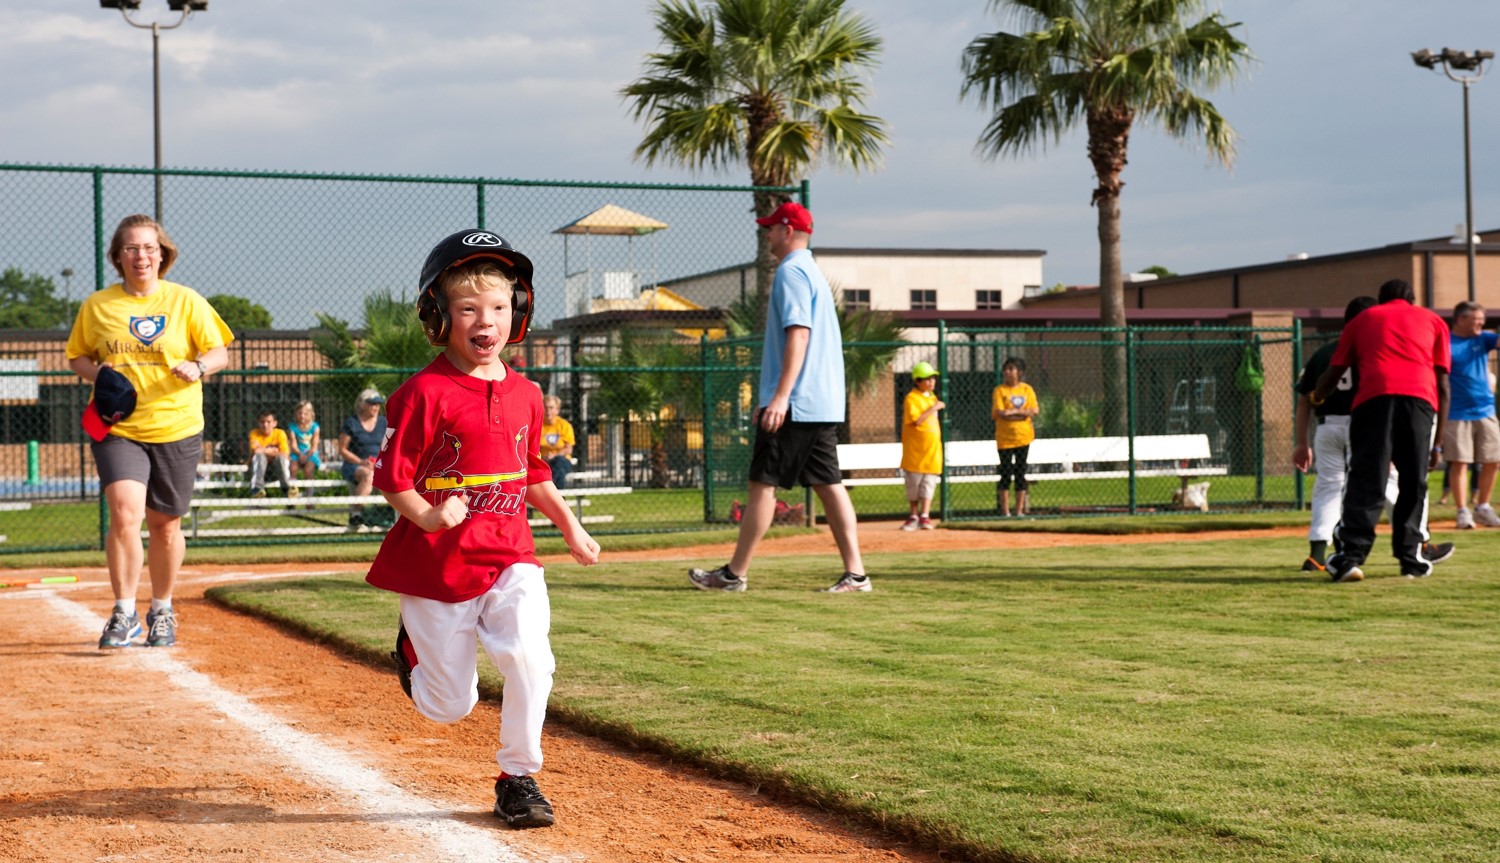 A young boy in a Cardinals jersey plays baseball on Miracle league field.